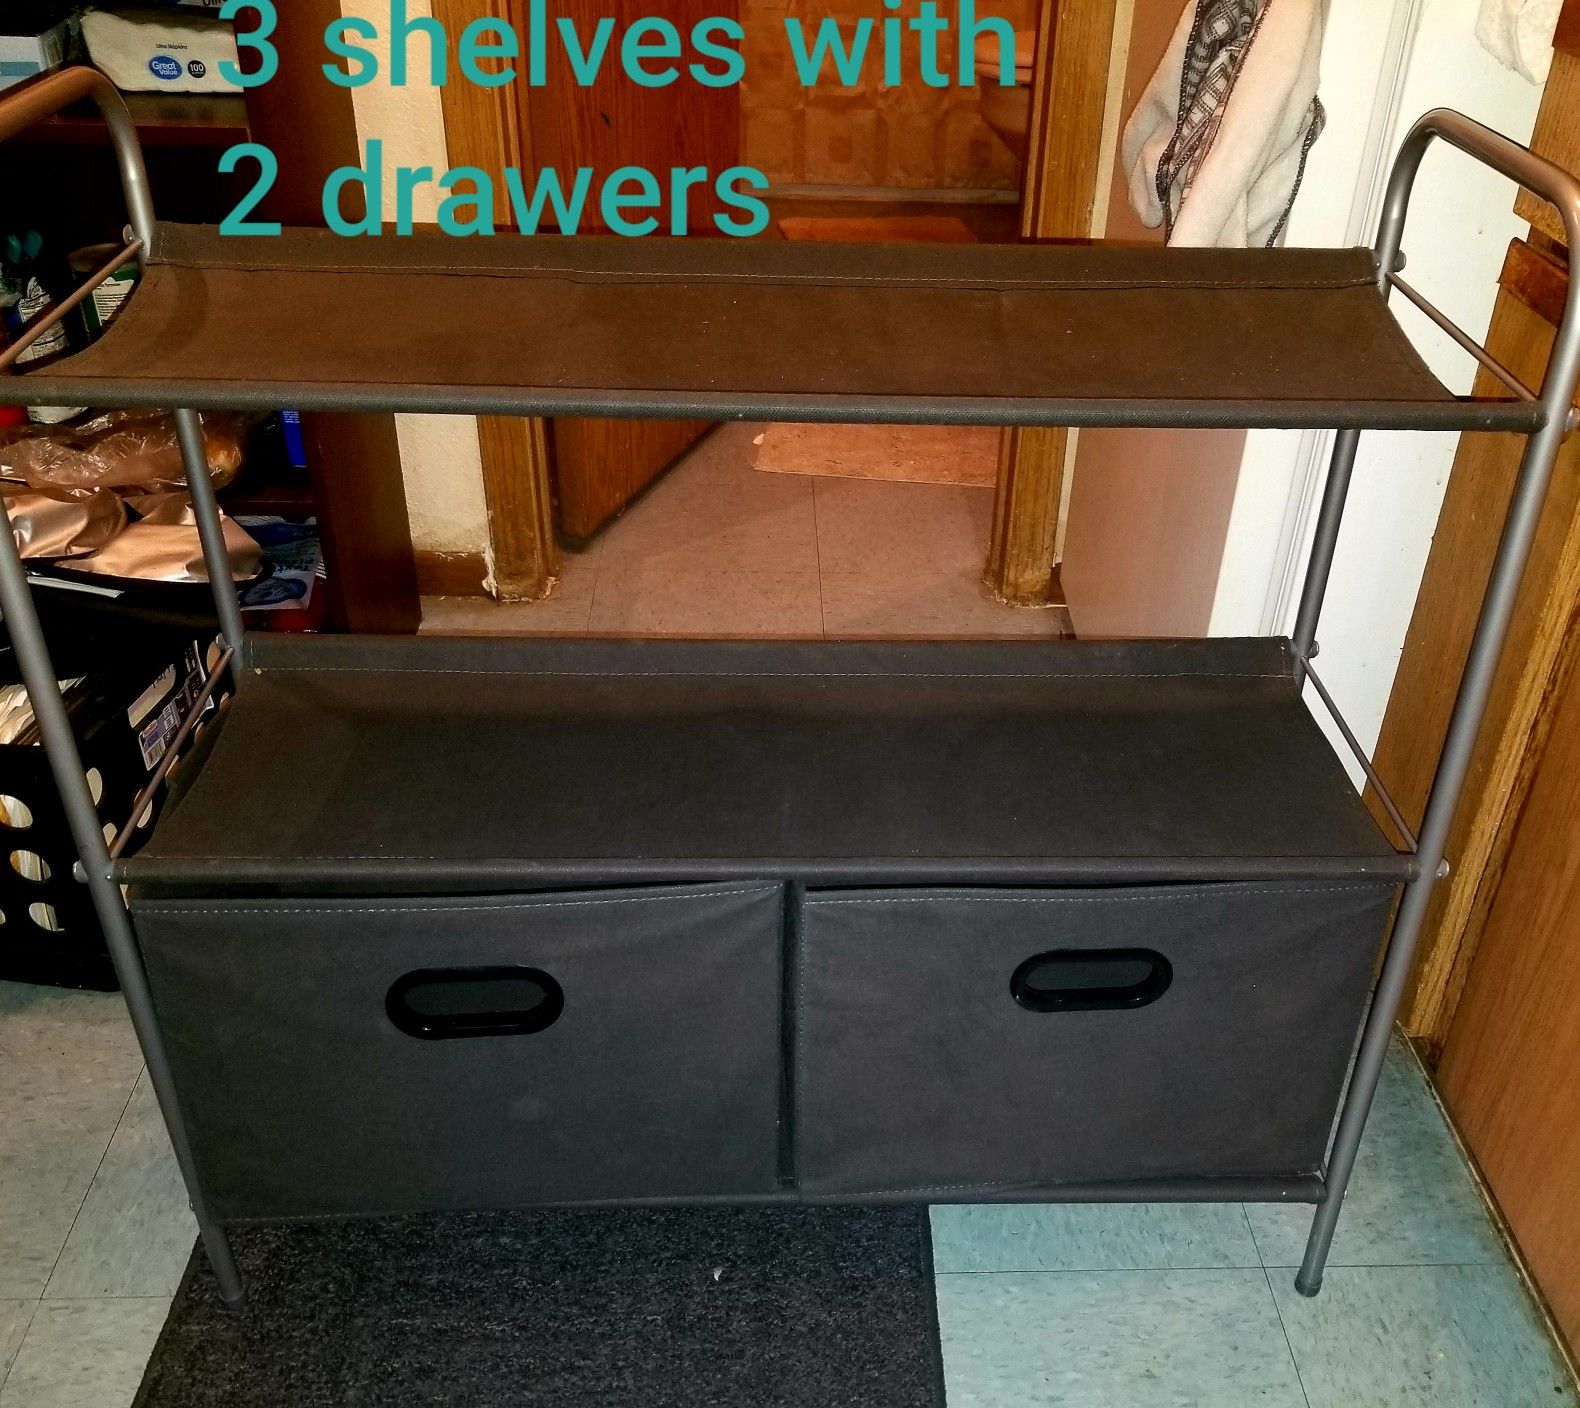 Fabric shelves (3 shelves with 2 drawers)